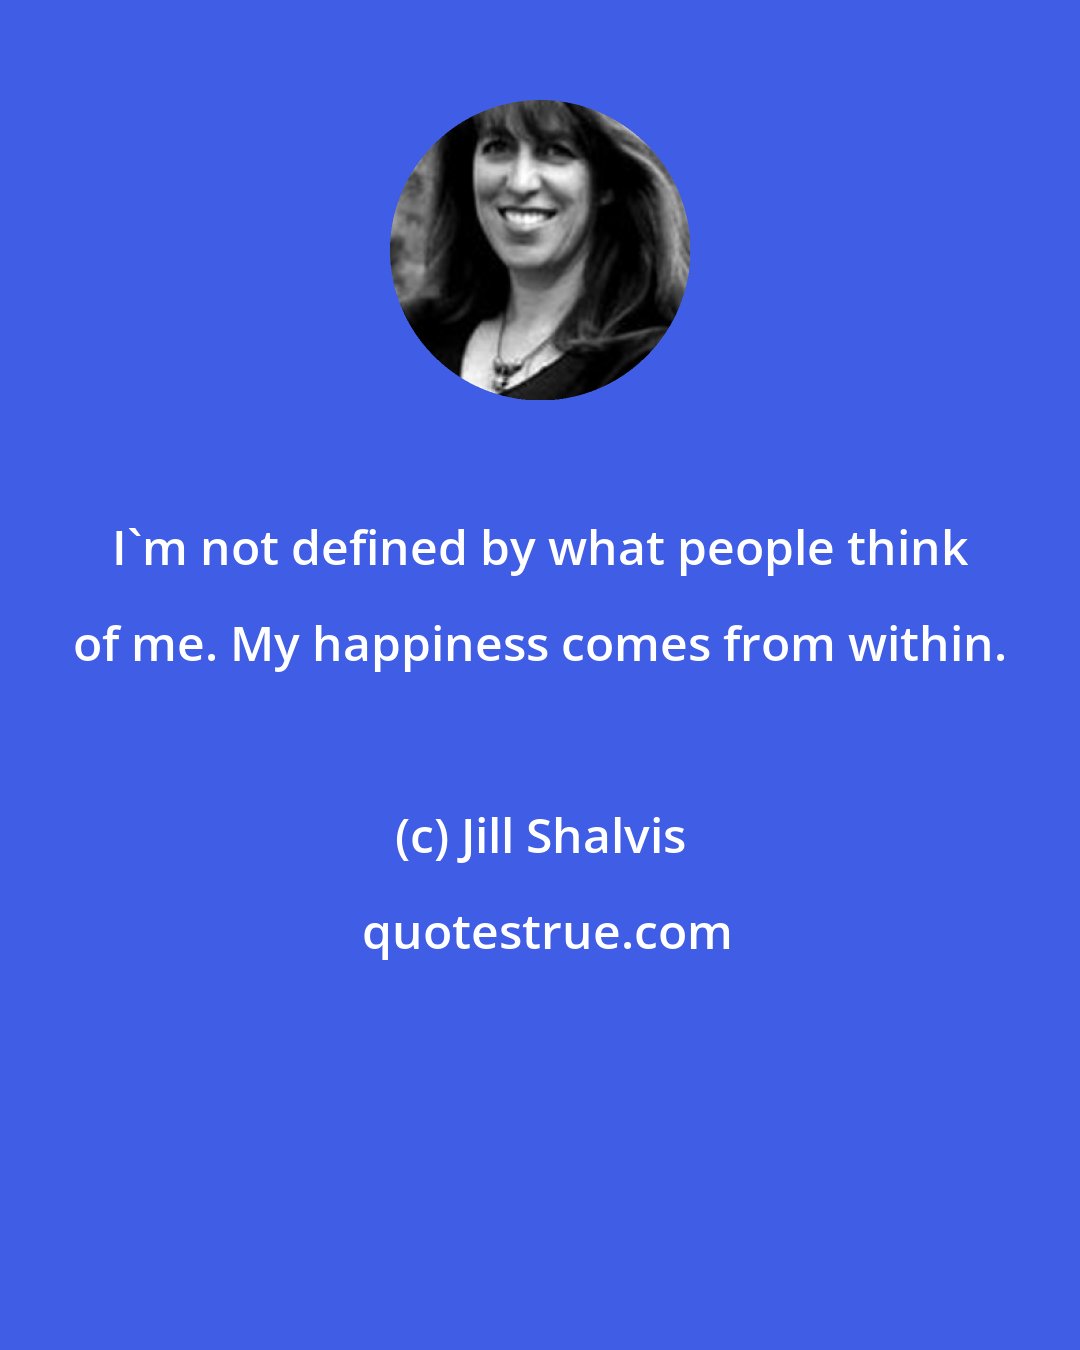 Jill Shalvis: I'm not defined by what people think of me. My happiness comes from within.